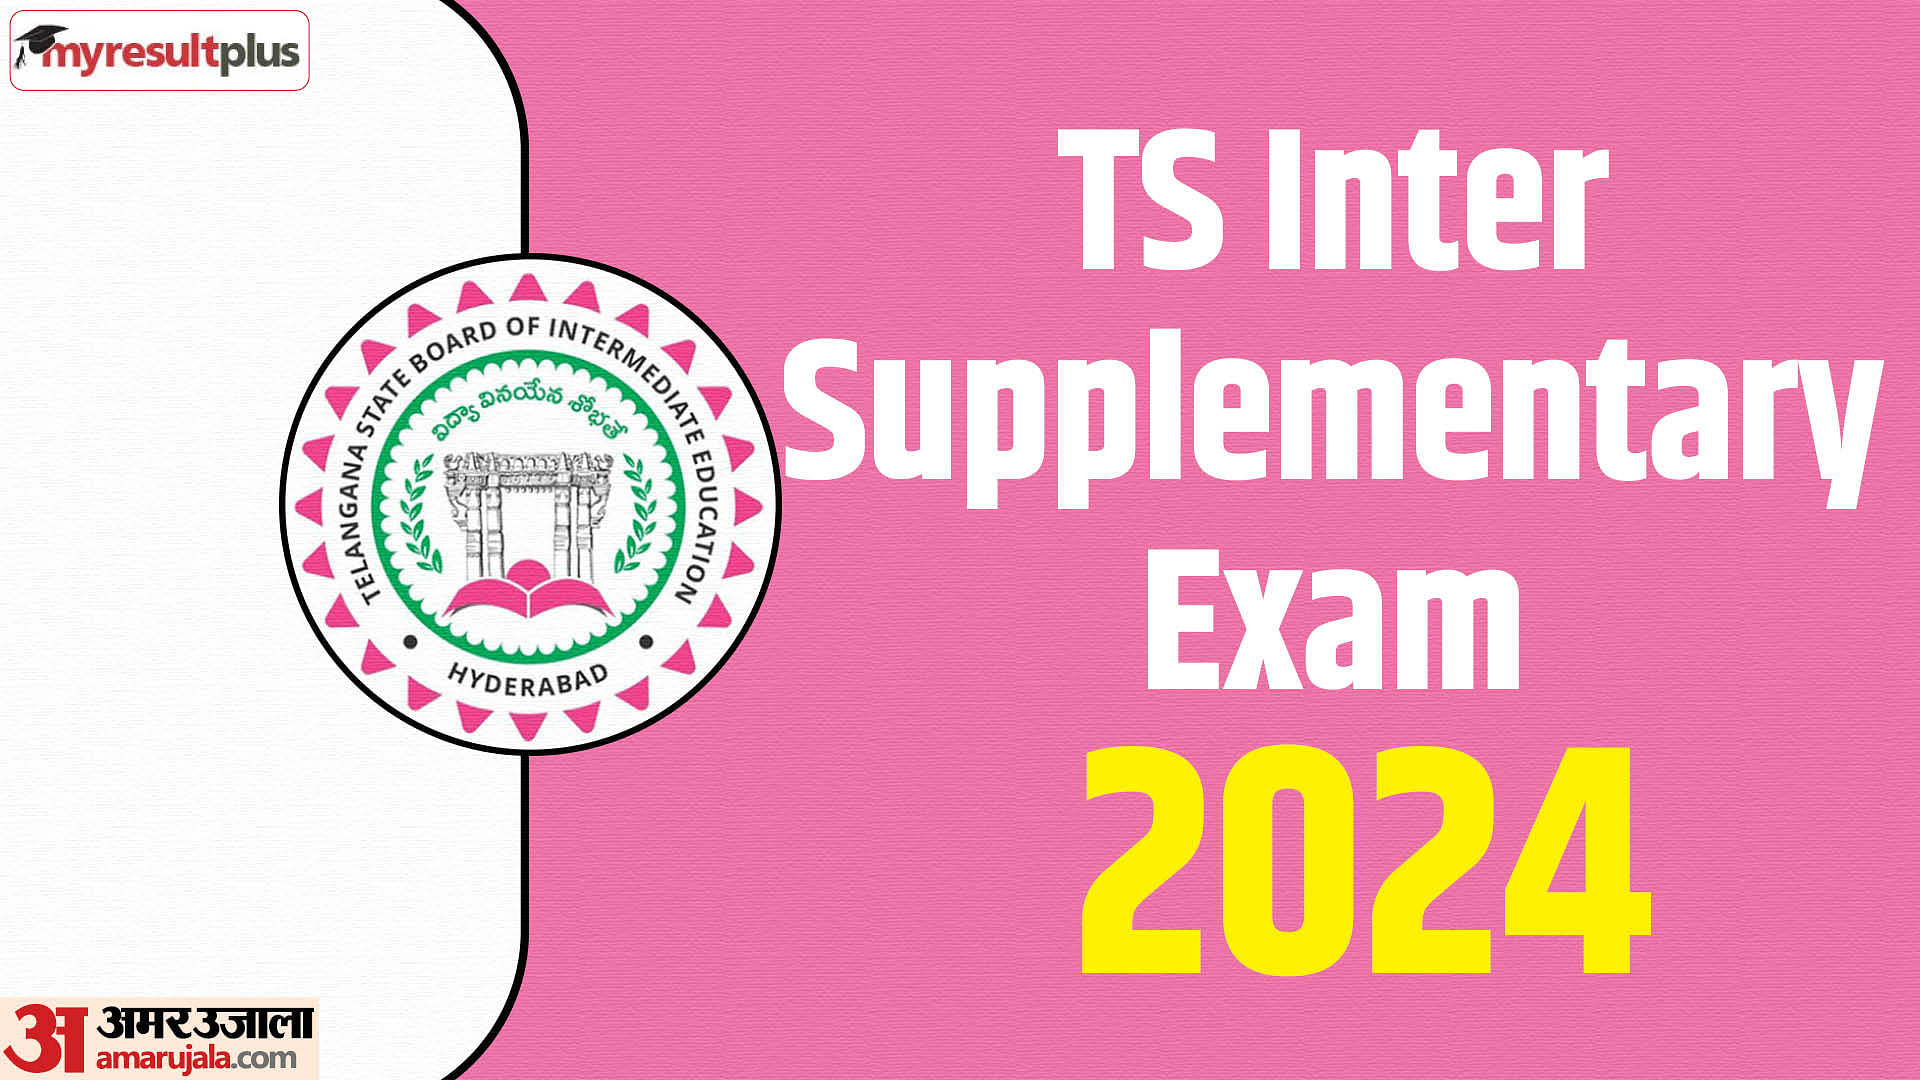 TS Inter Supplementary Exam 2024 registration window closing today, Submit applications at tsbie.cgg.gov.in